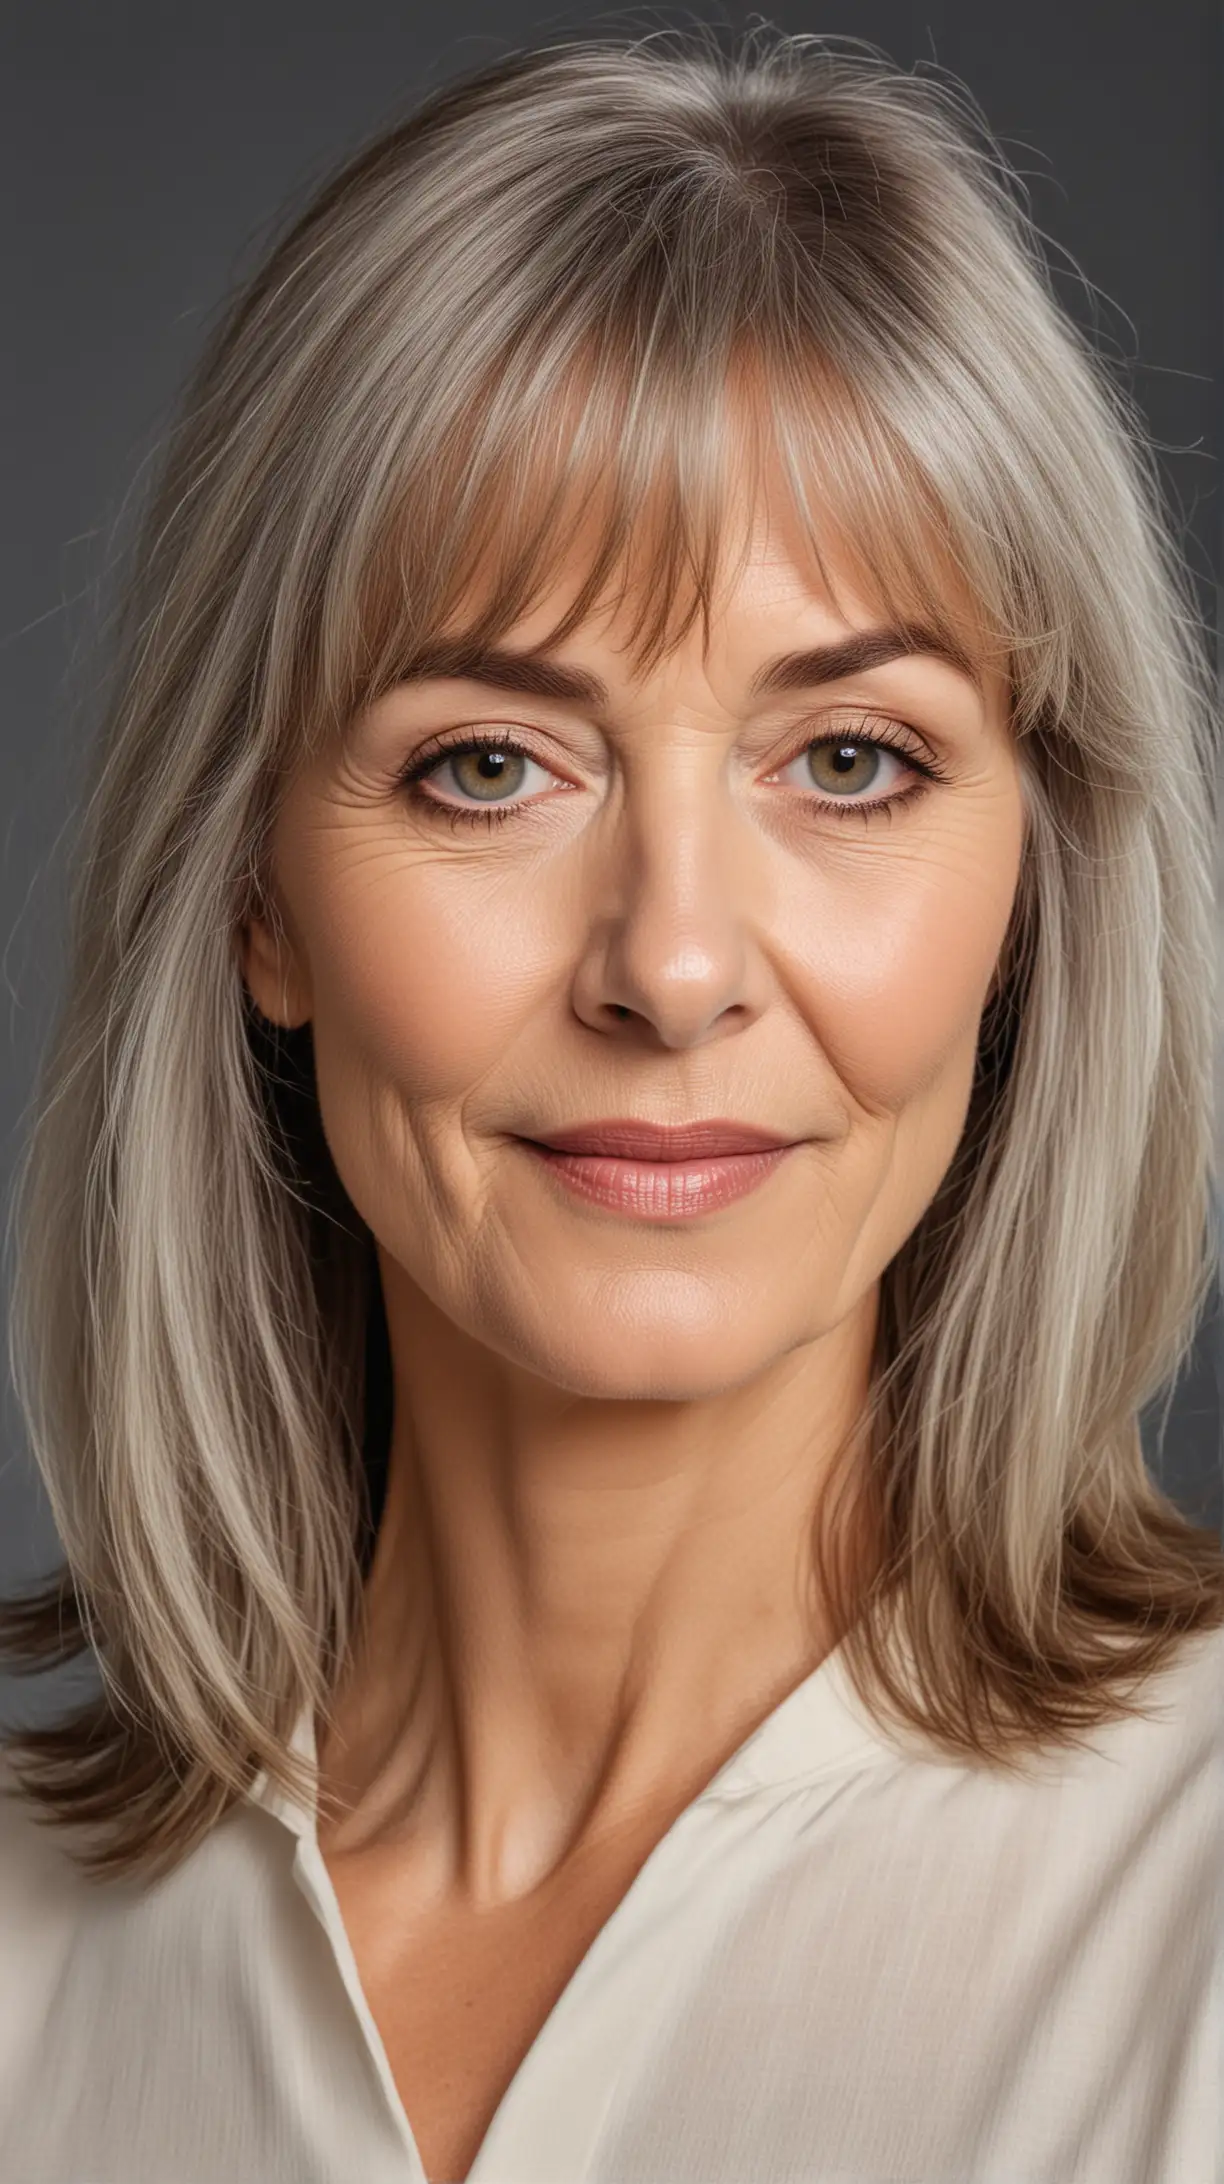 Beautiful woman of model appearance, over 60 years old, Shoulder-length hair paired with bangs, oval and long face